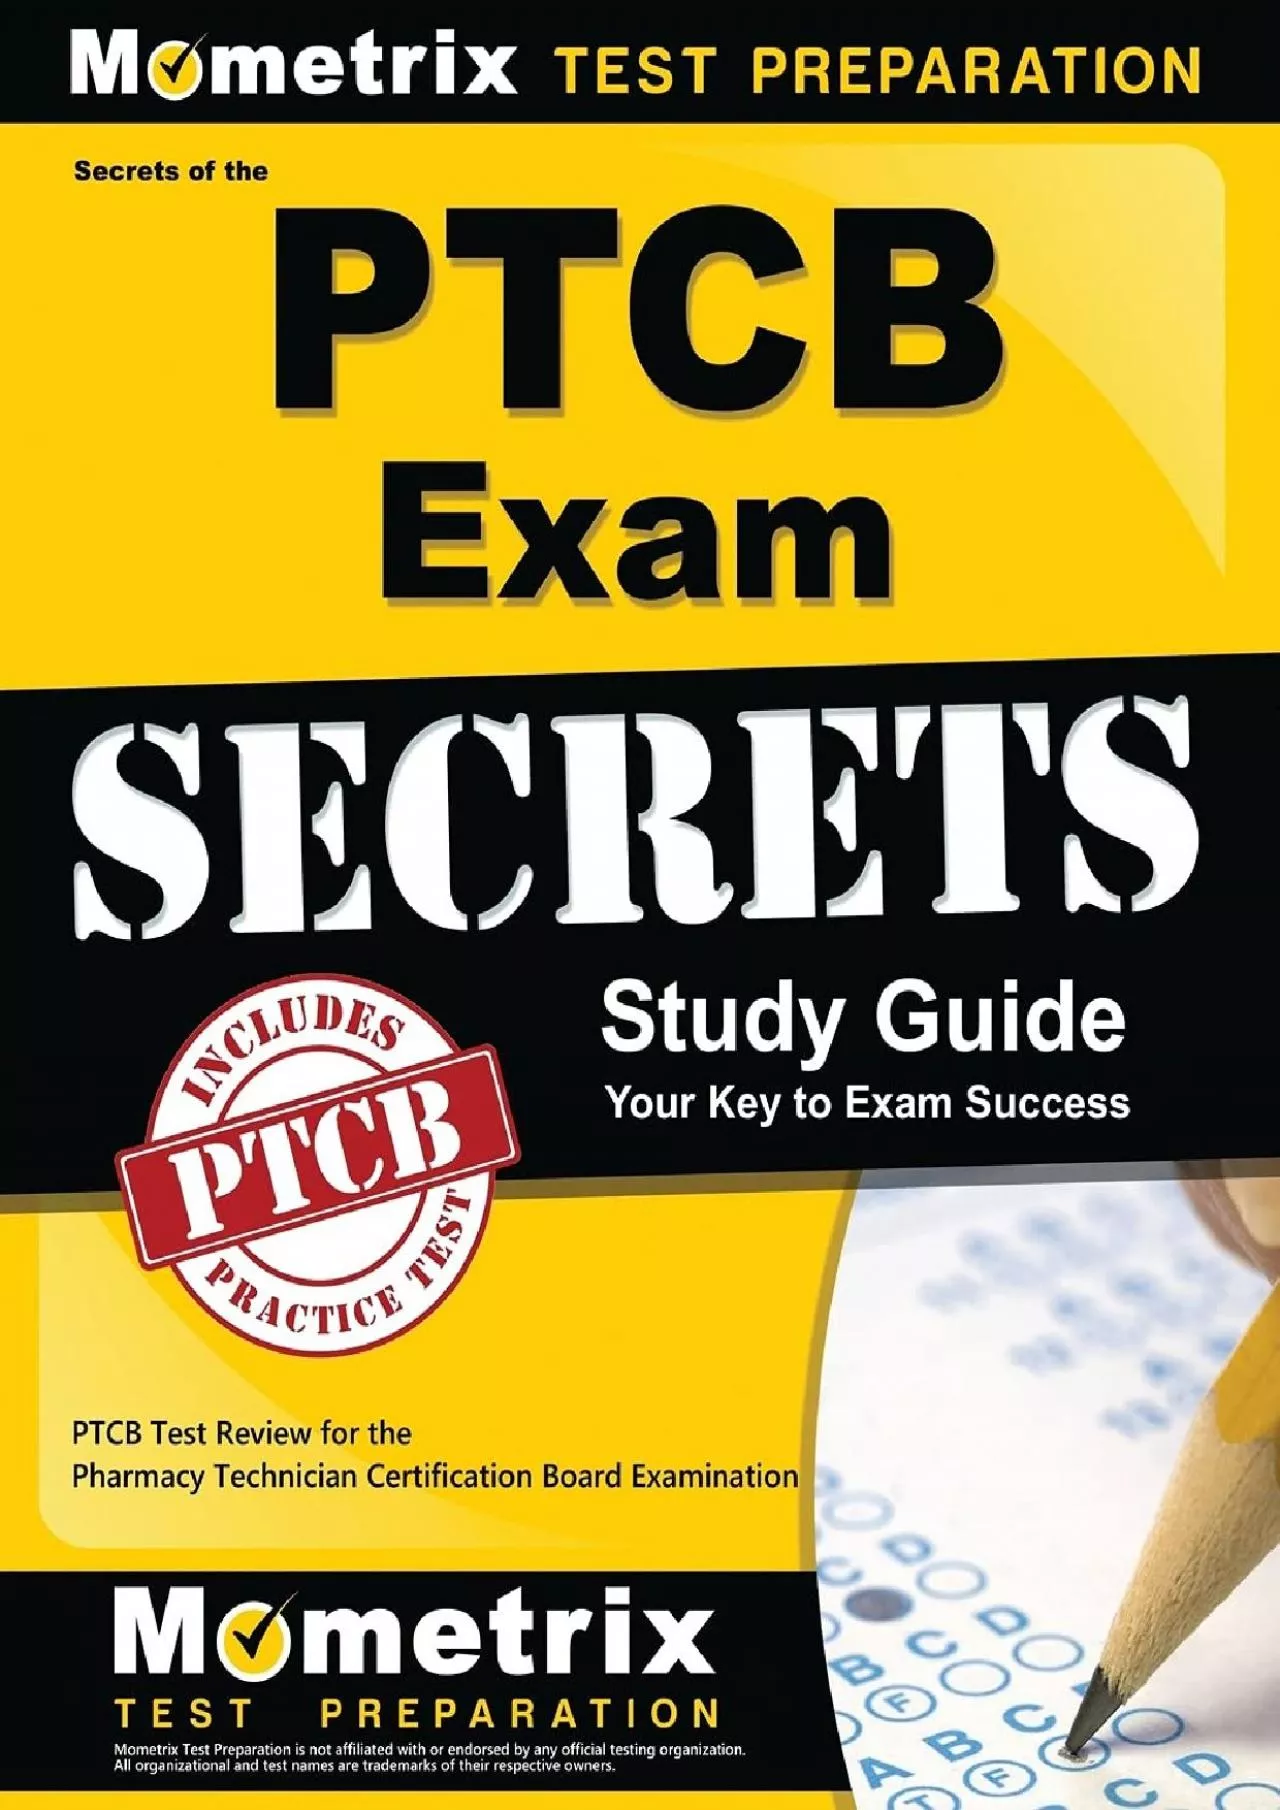 (READ)-Secrets of the PTCB Exam Study Guide: PTCB Test Review for the Pharmacy Technician